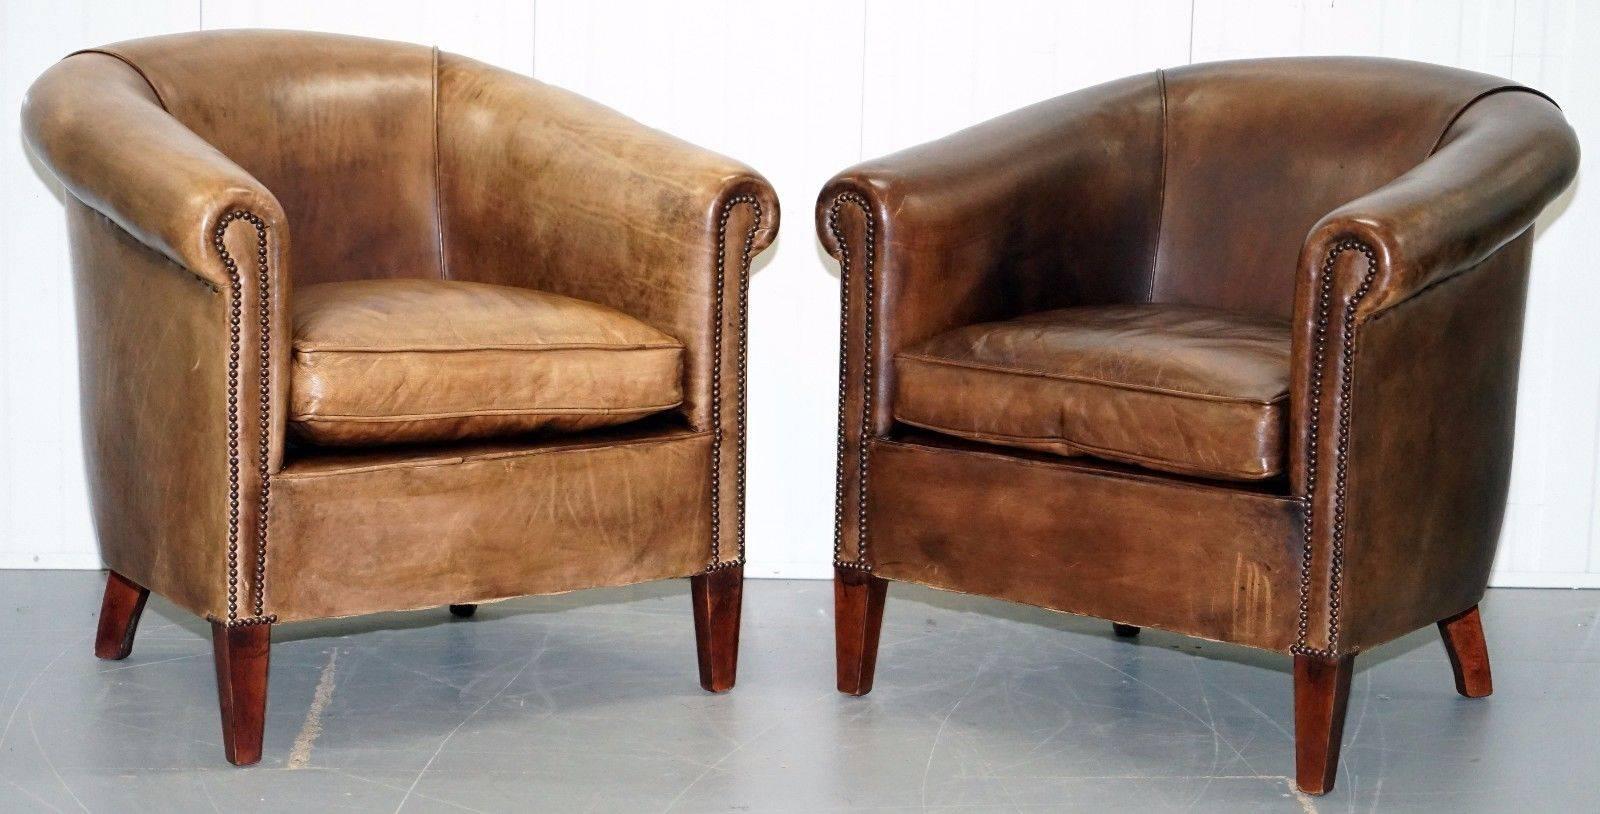 1 of 2 Leather chairs of Bath Amsterdam RRP £1895 each armchairs as seen in James Bond Specture

This auction is for the one chair, the other chair is listed under my other items, its pictured below so you can see the pair together, it’s the exact